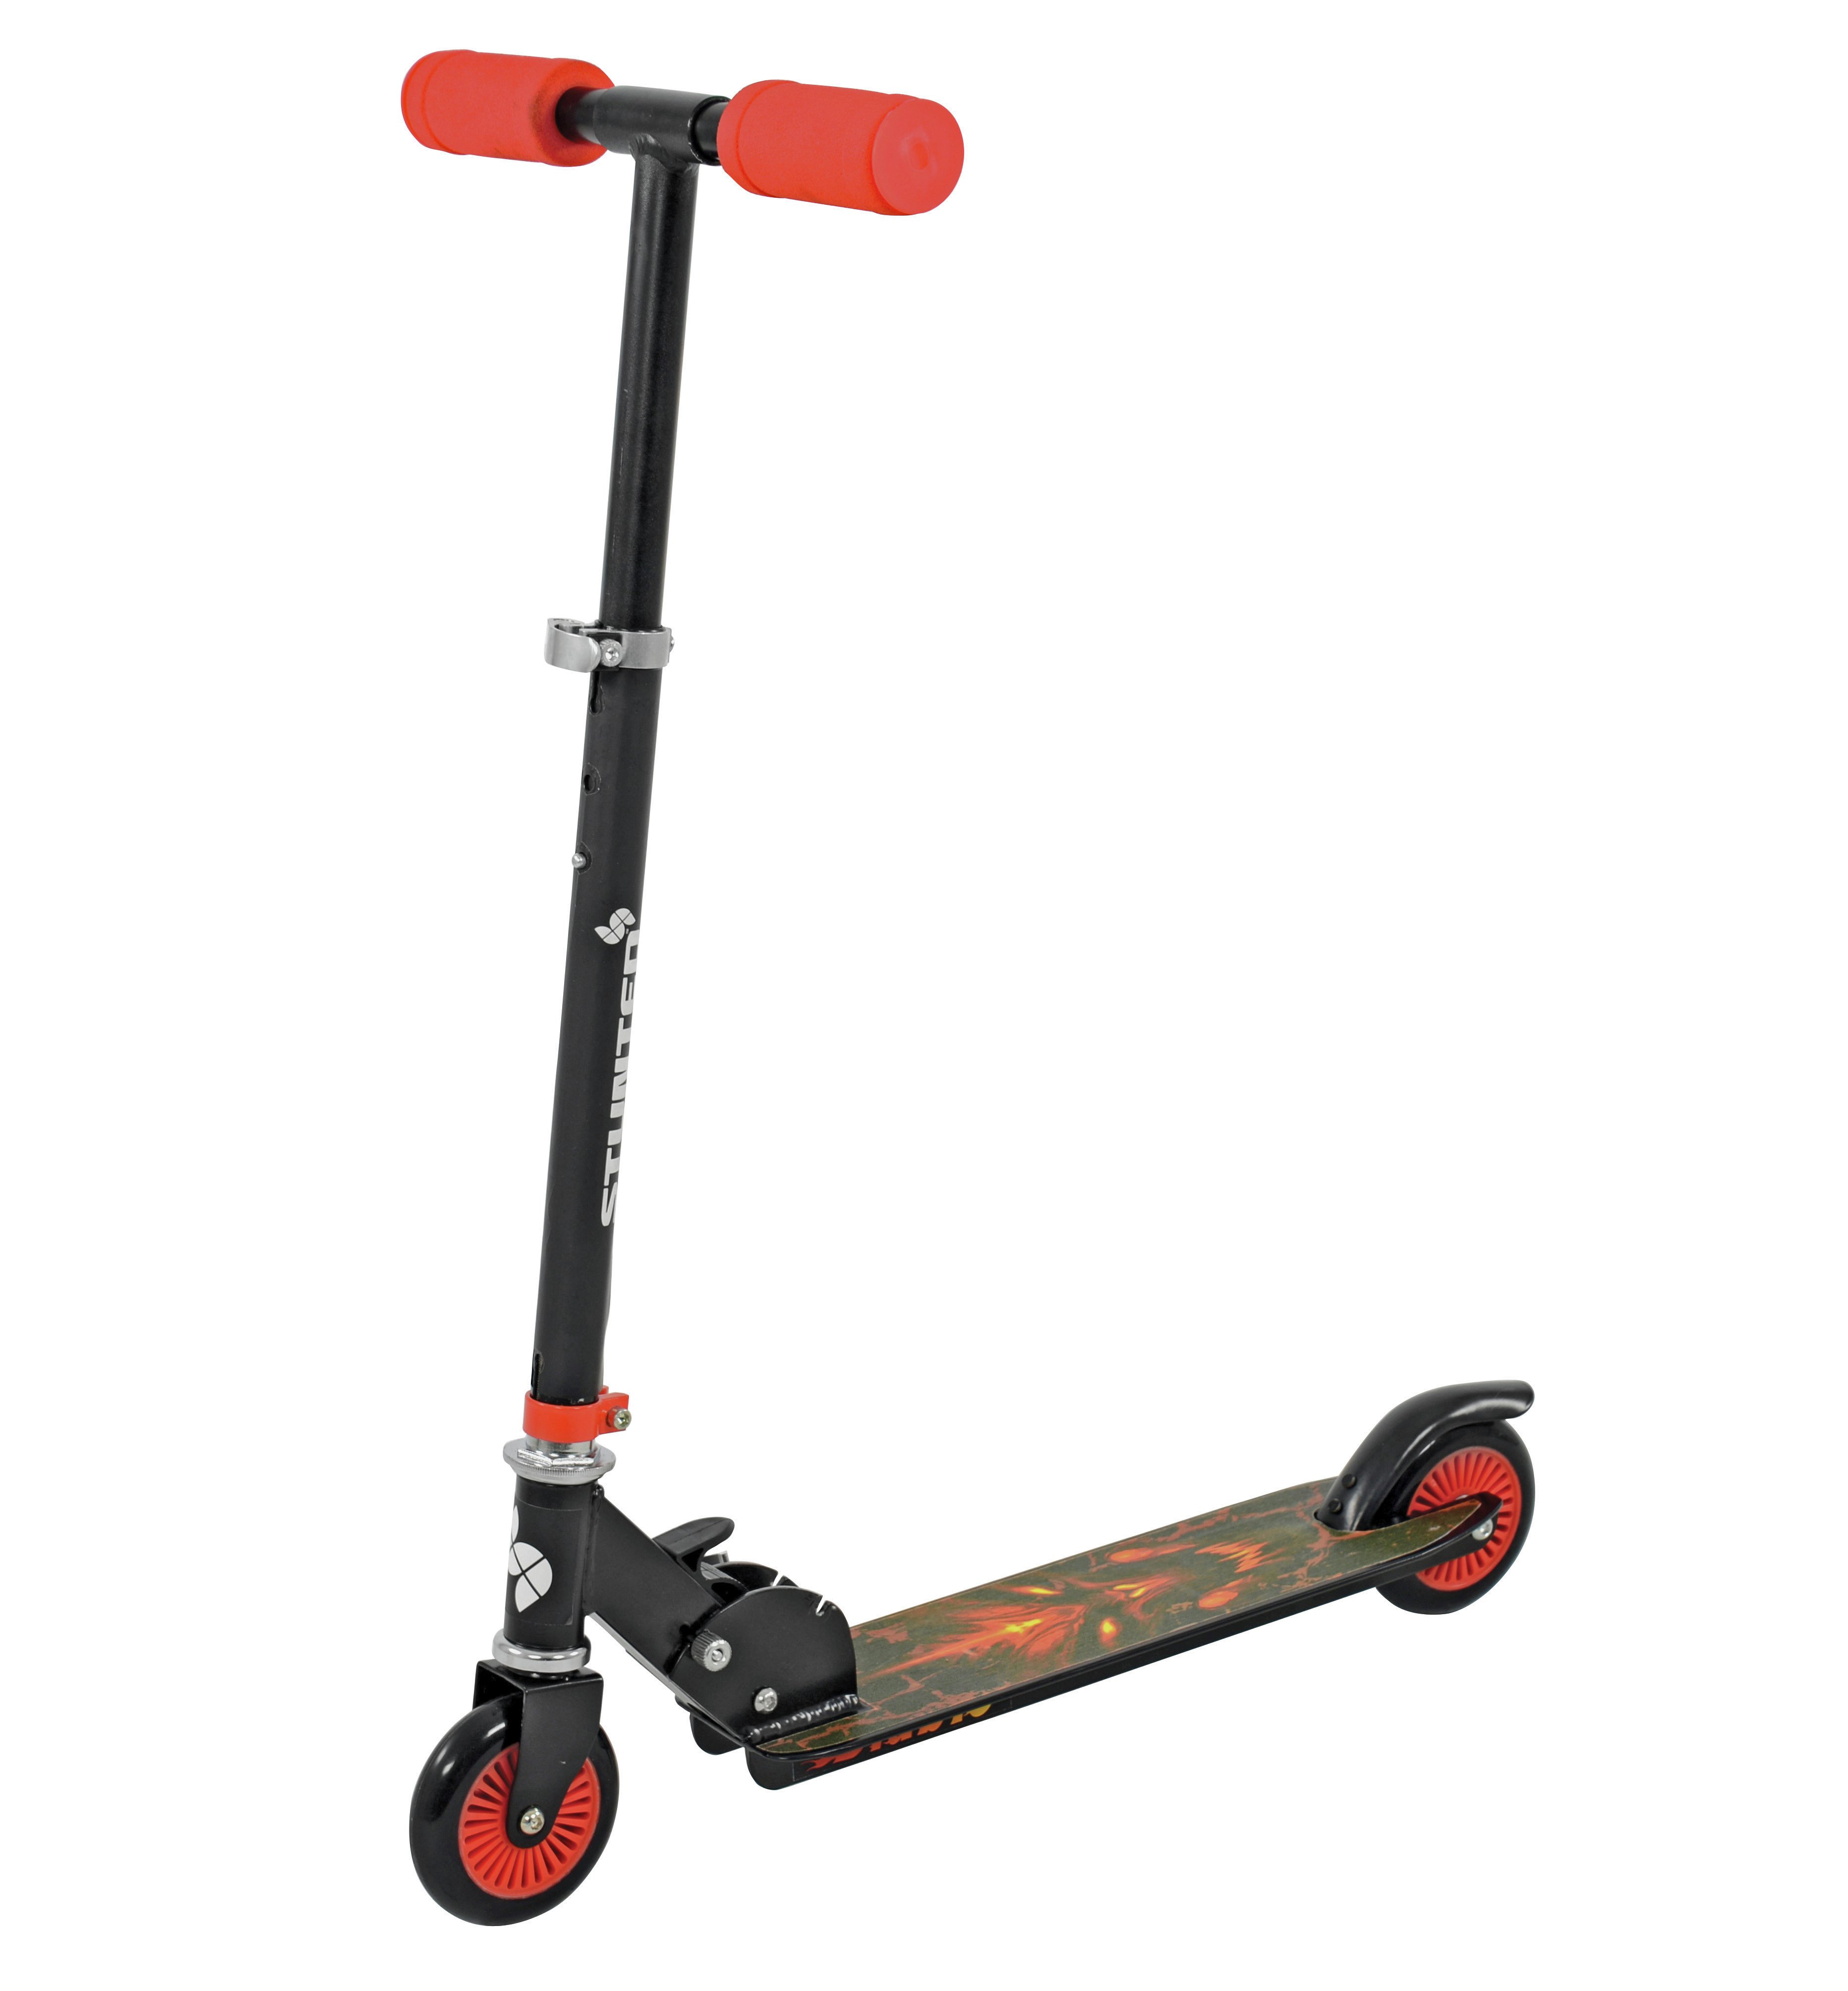 Stunted Dragon Scooter